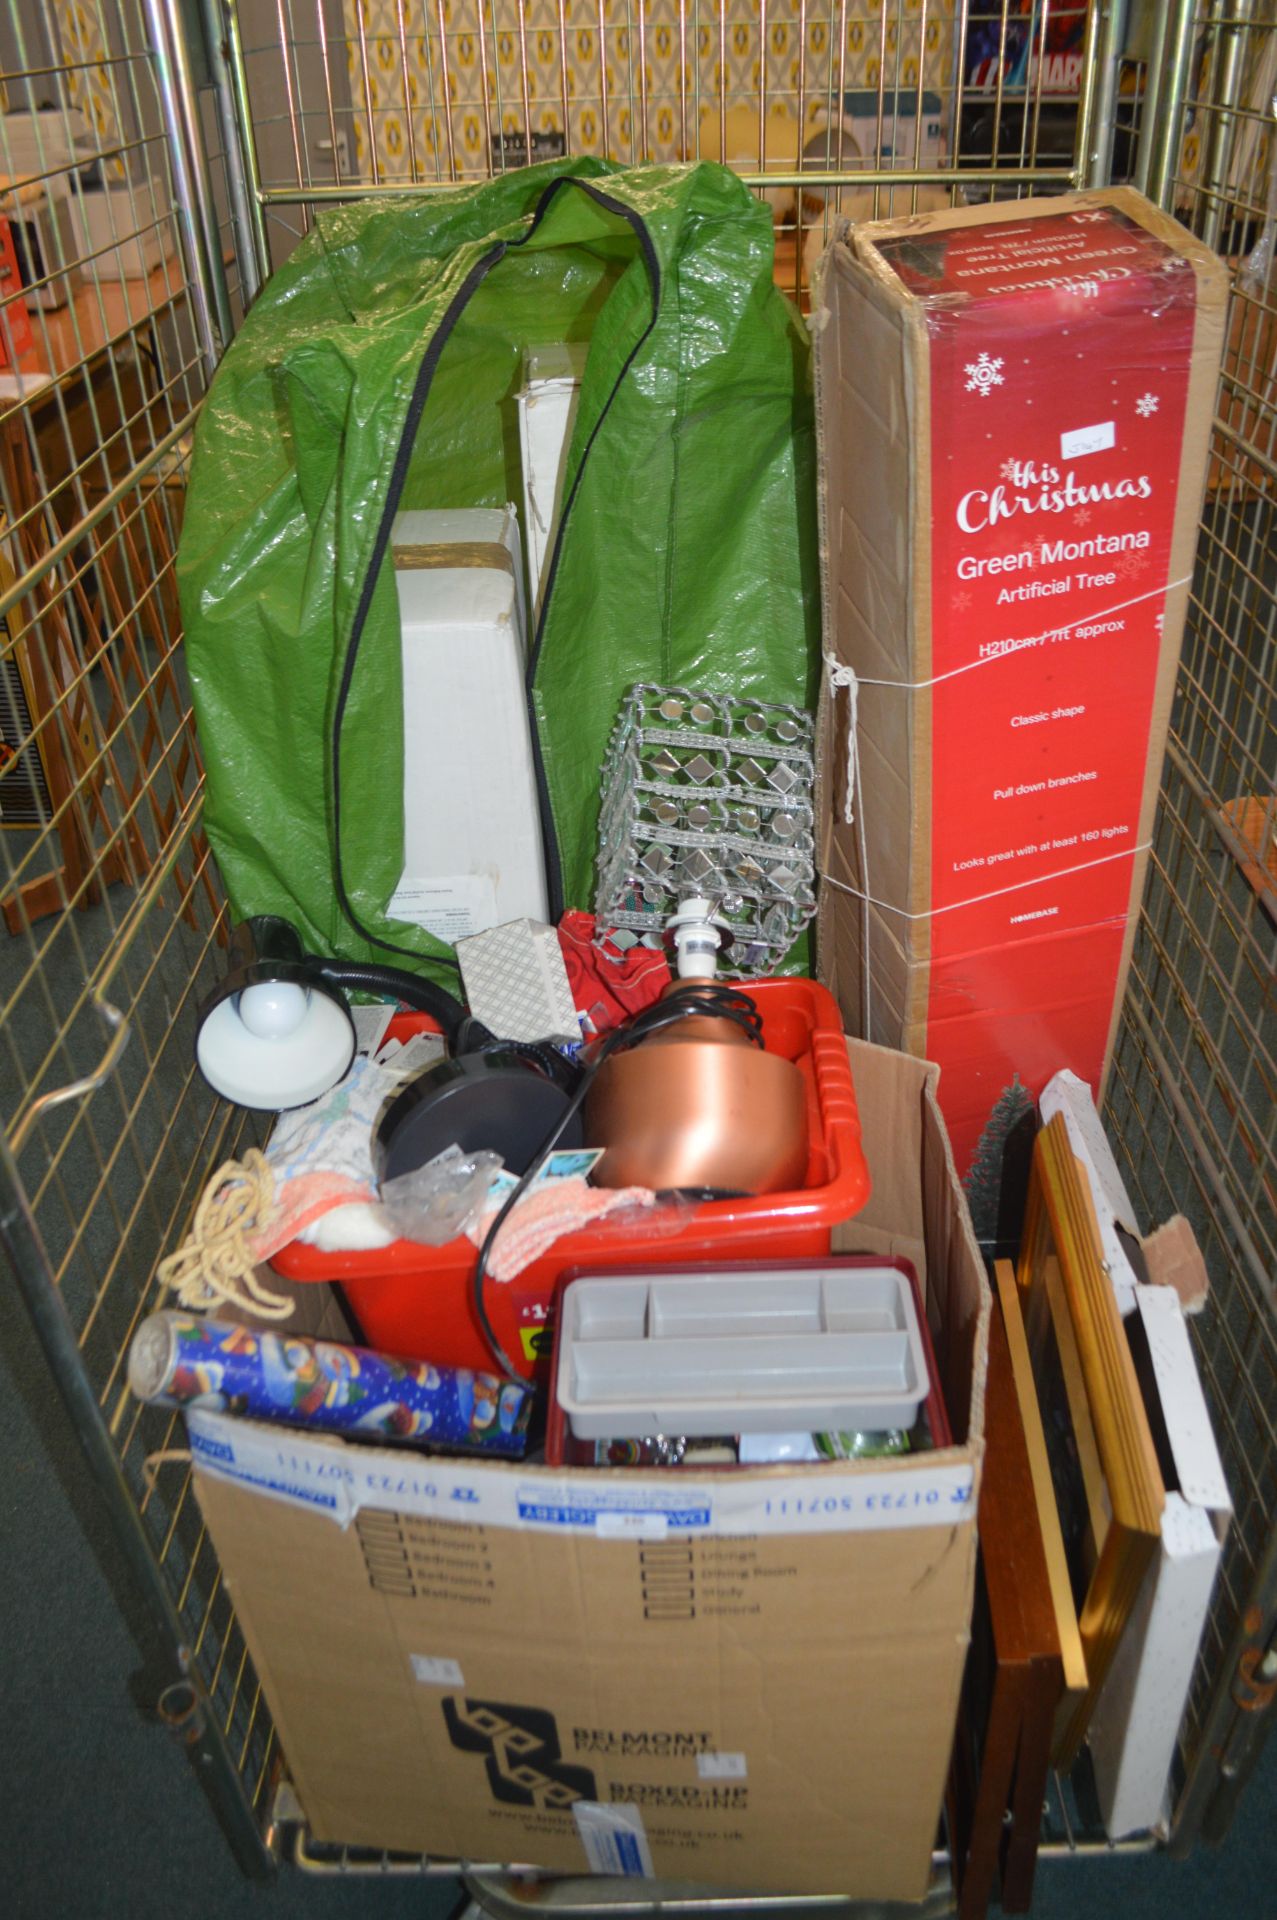 Household Goods Including Christmas Trees, Lamps,